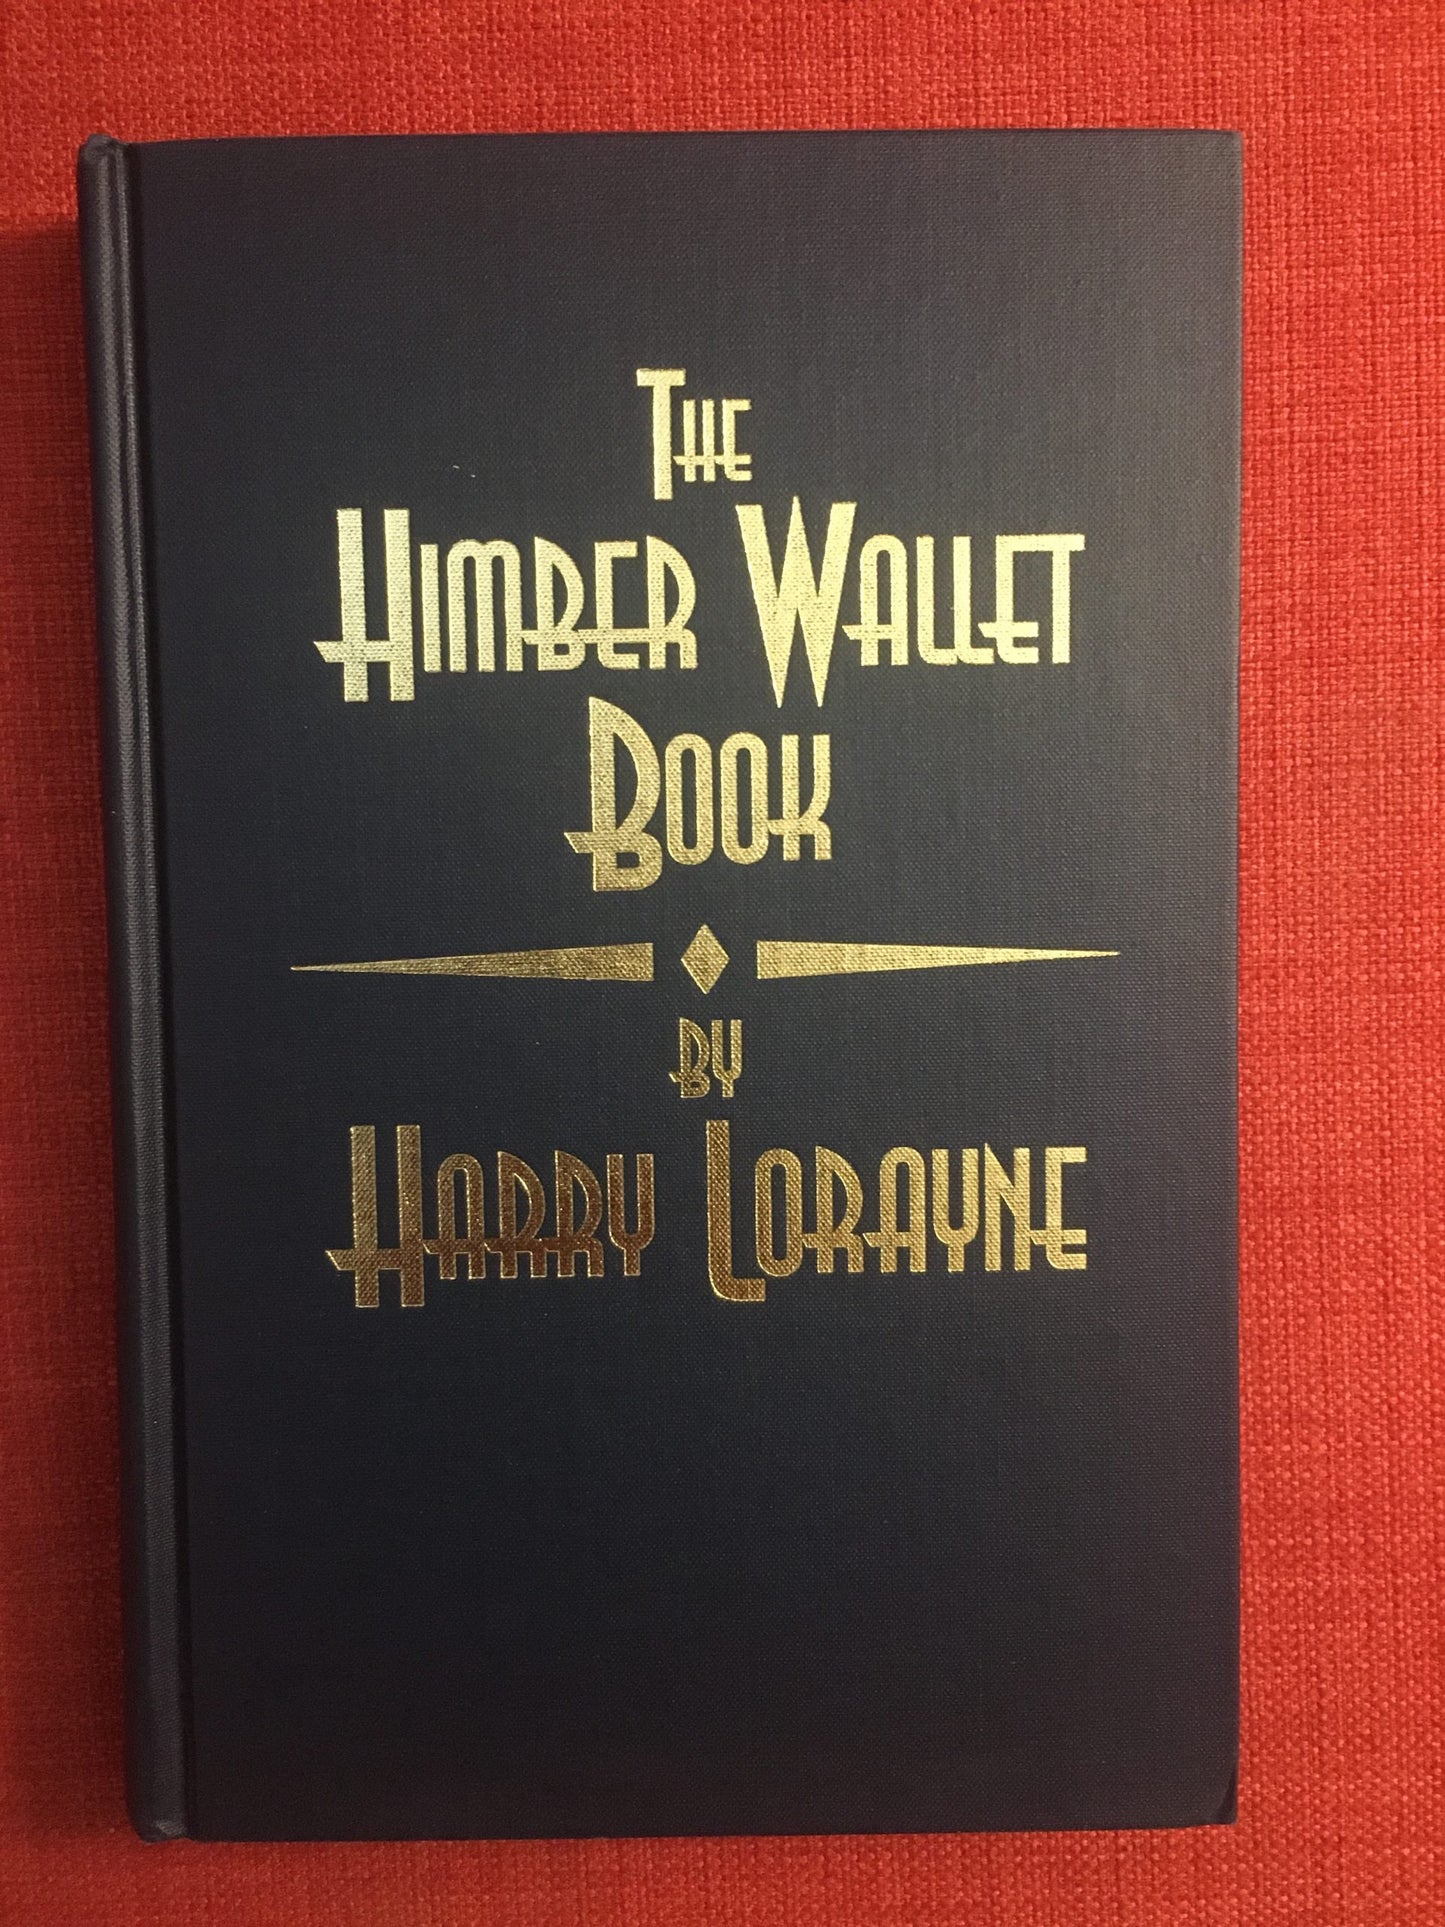 The Himber Wallet Book, by Harry Lorayne, used/rare